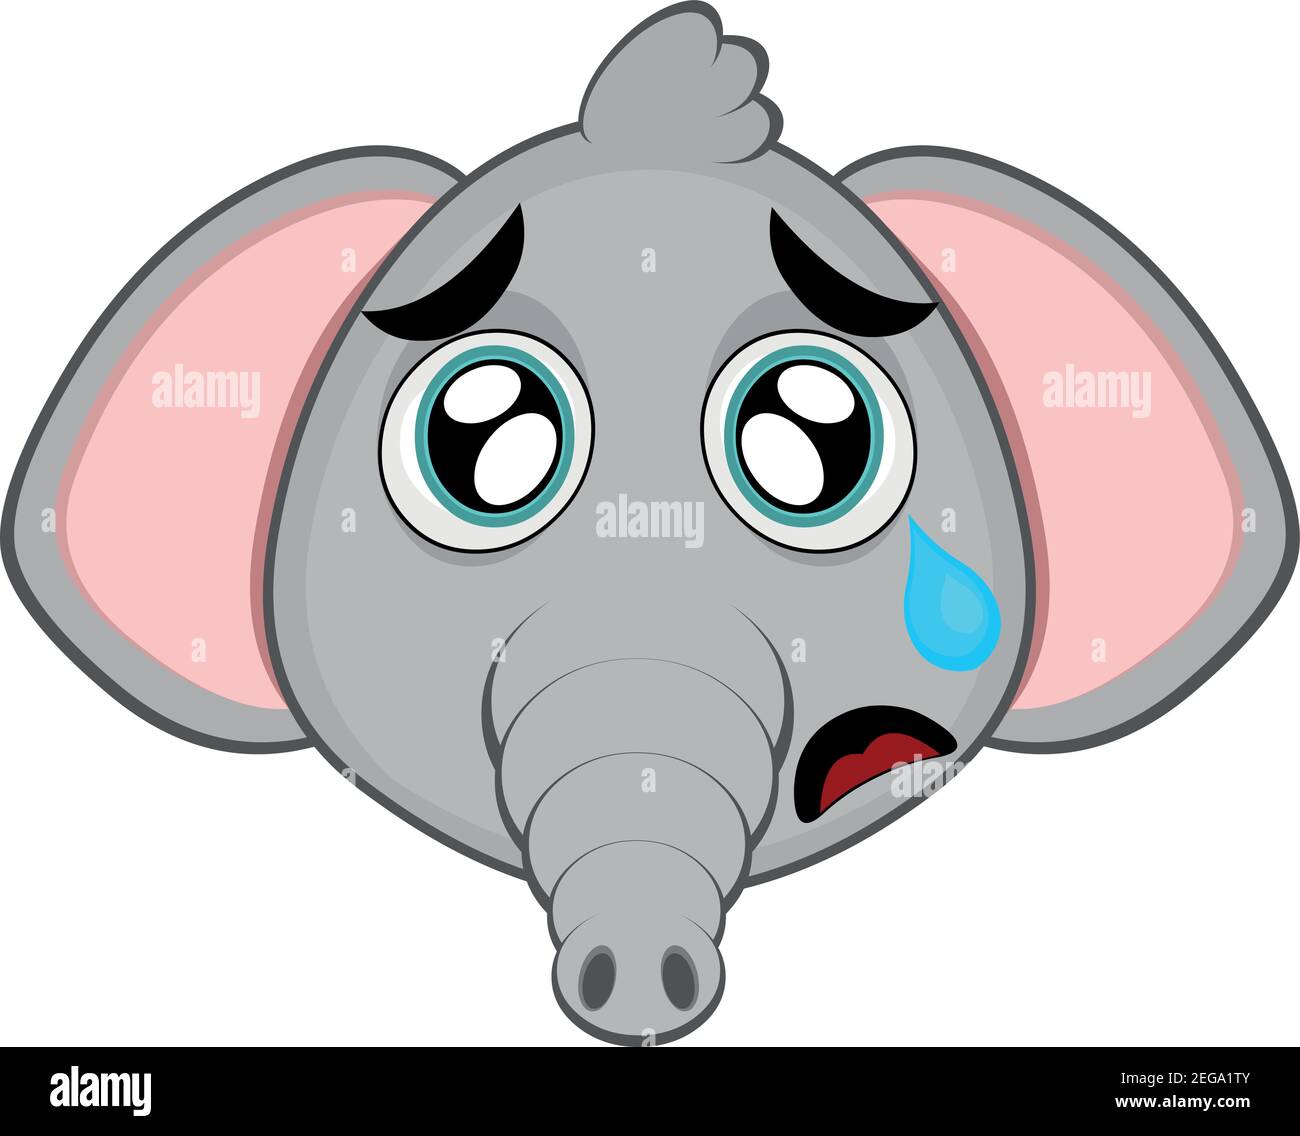 Vector emoticon illustration cartoon of an elephant´s head with a sad expression and crying with a tear falling from its eye over its cheek Stock Vector